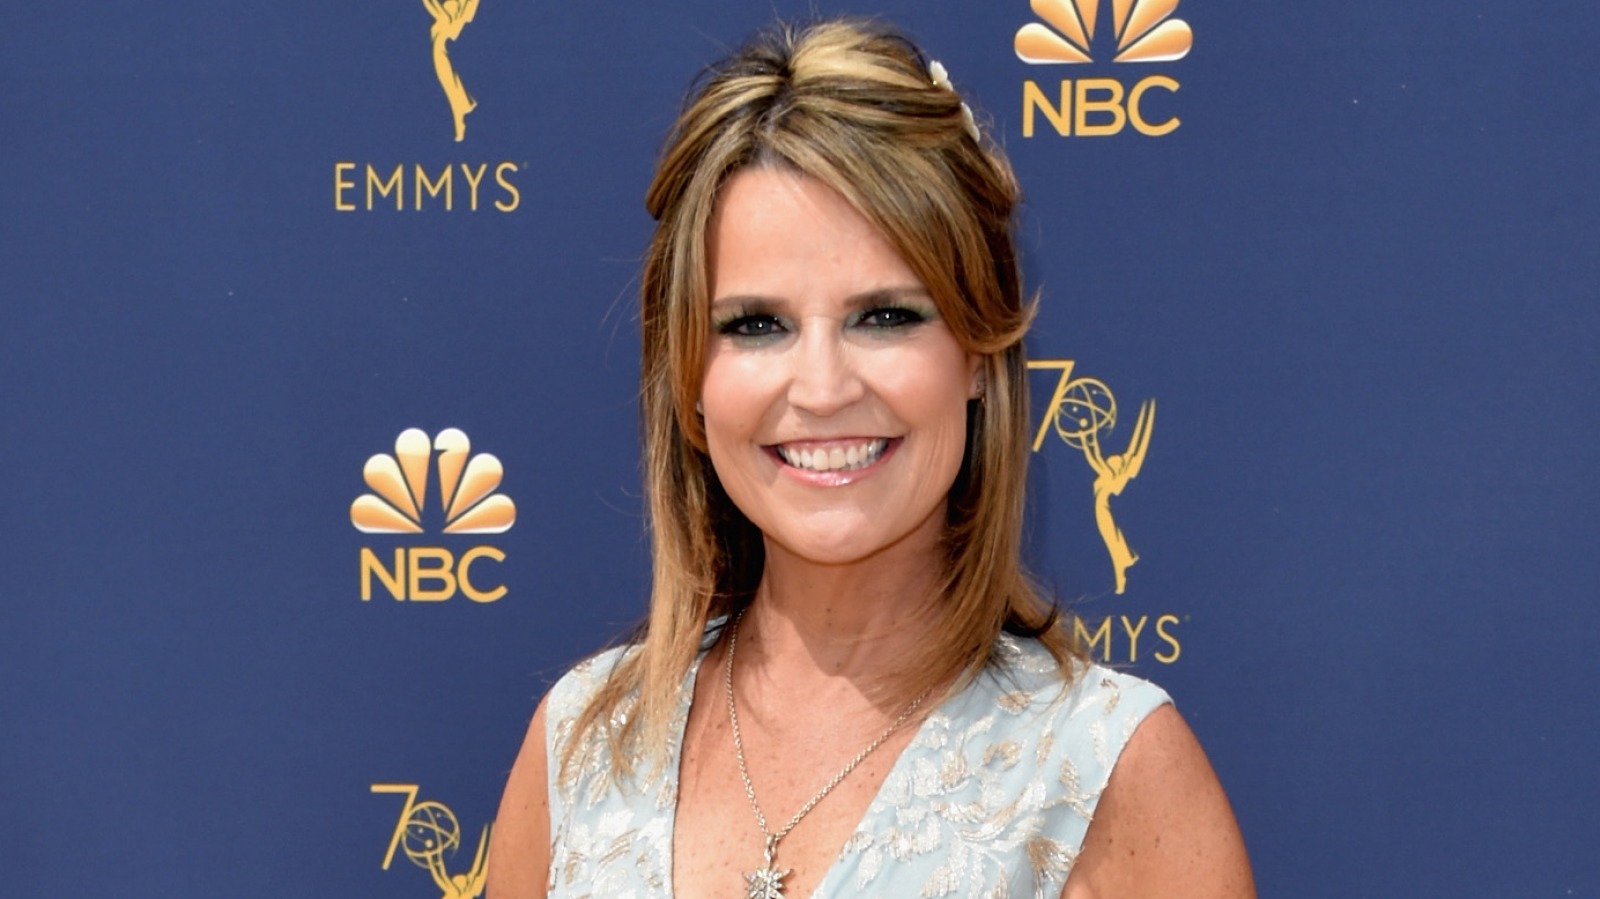 What You Don't Know About Savannah Guthrie